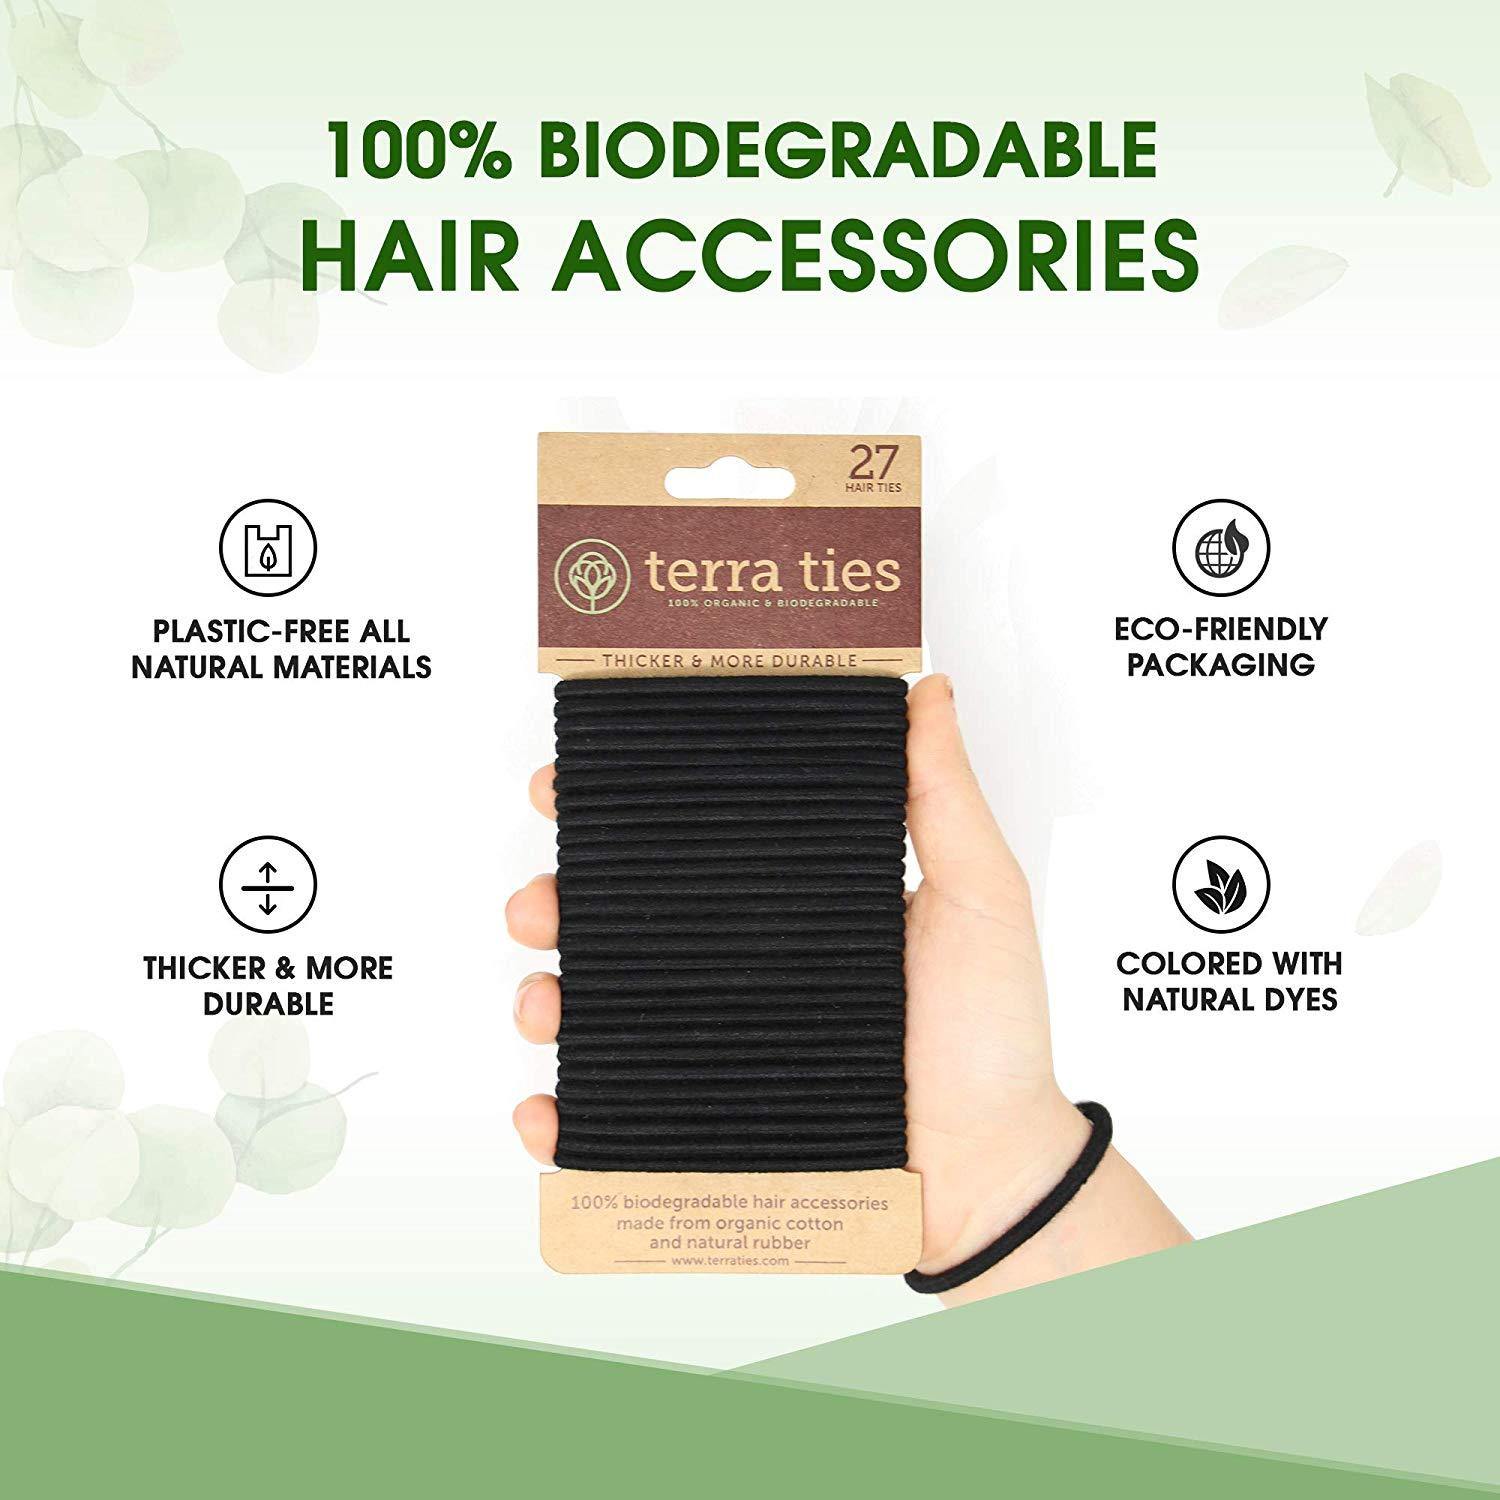 hand holding a pack of 27 black hair ties - featuring that they are 100% biodegradable, natural dies, and plastic free